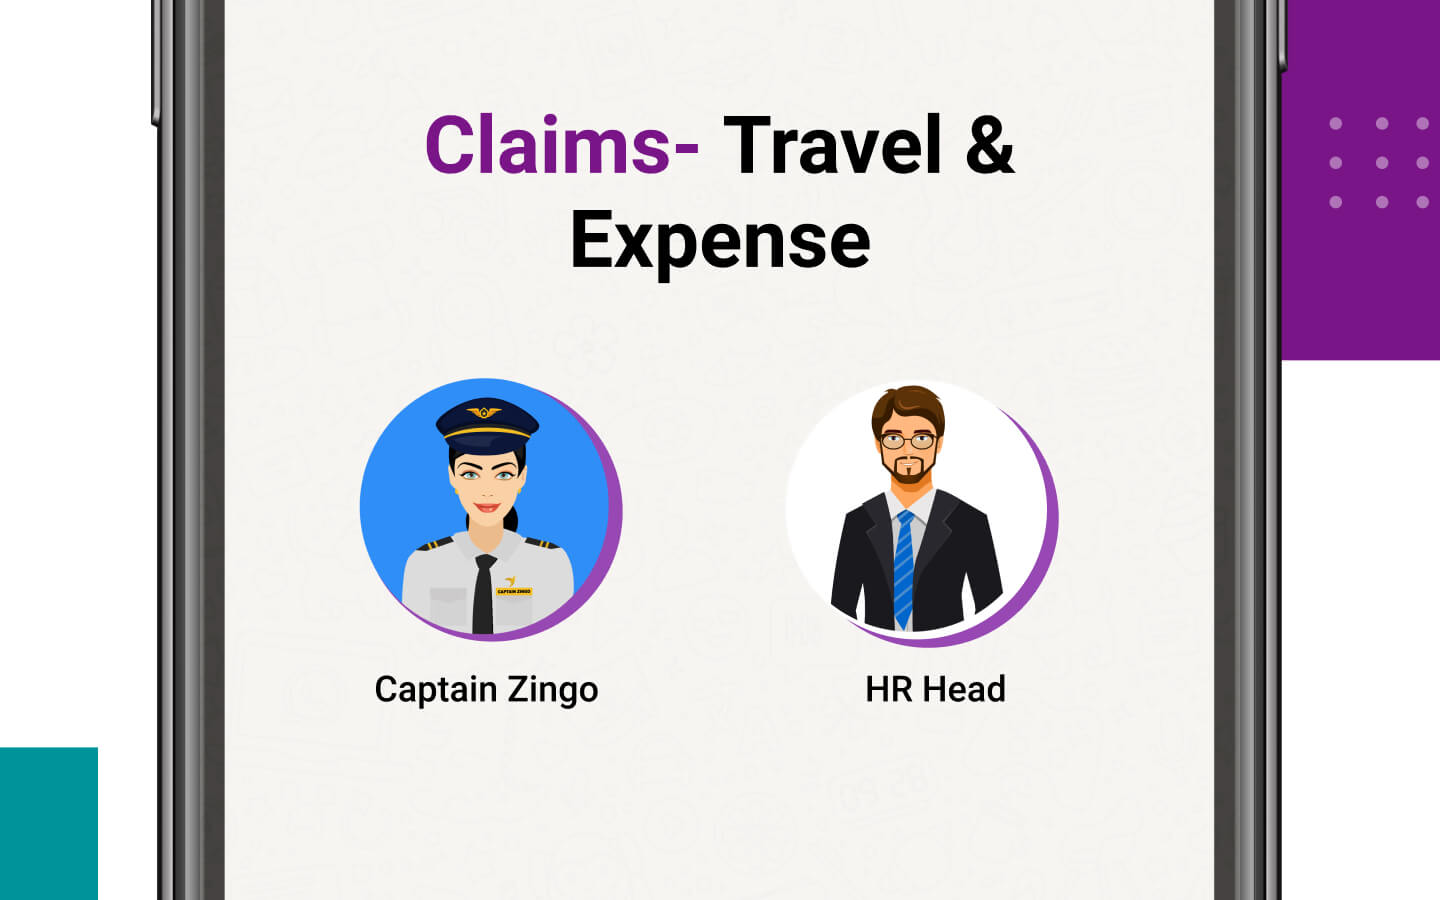 Claims- Travel & Expense